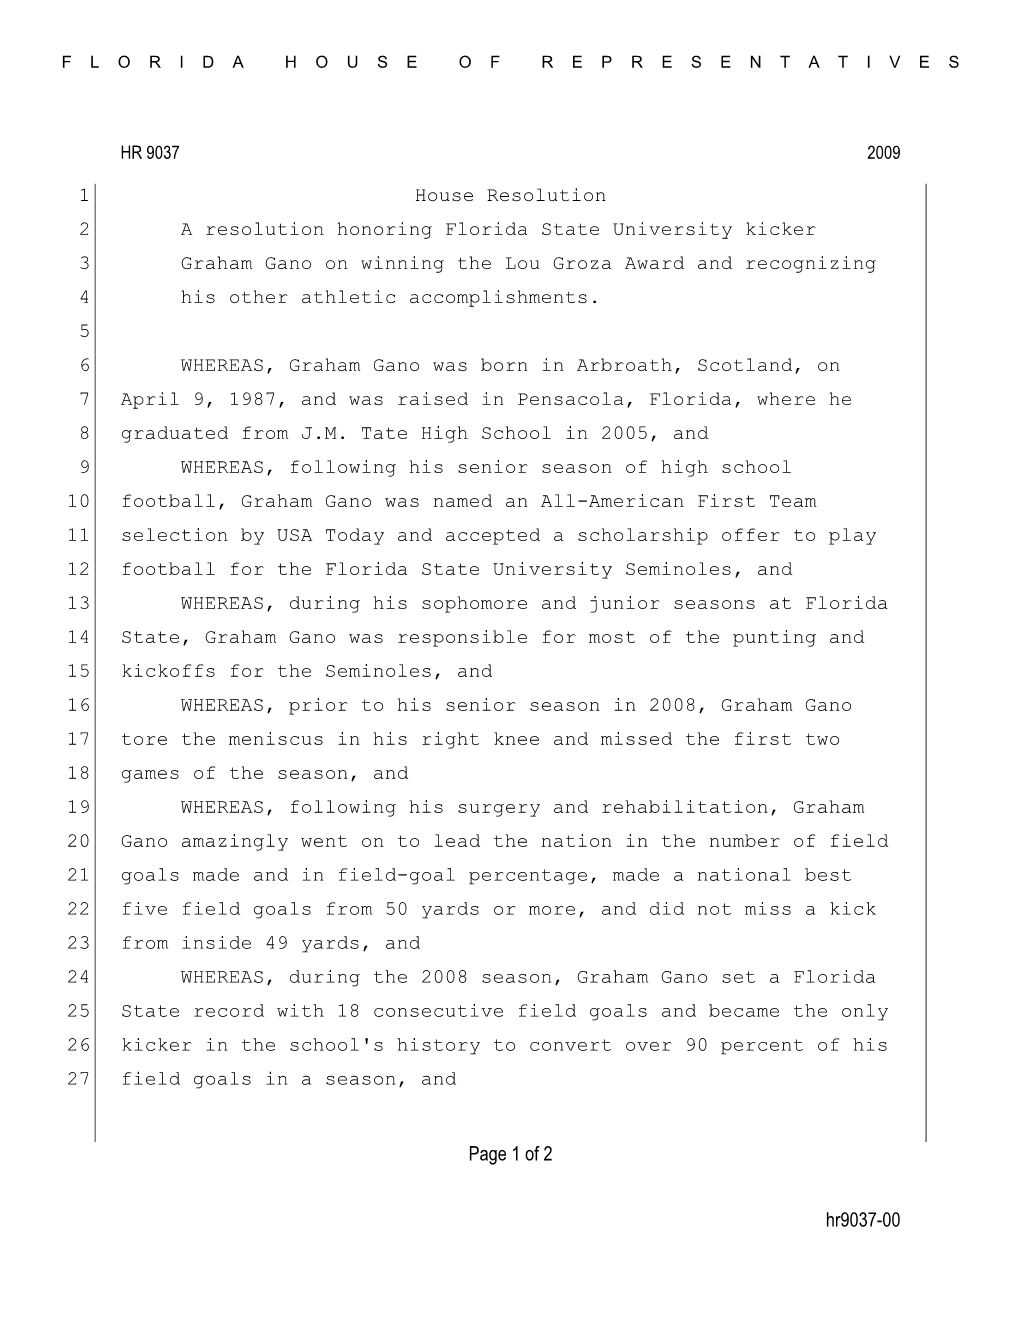 Hr9037-00 Page 1 of 2 House Resolution 1 A